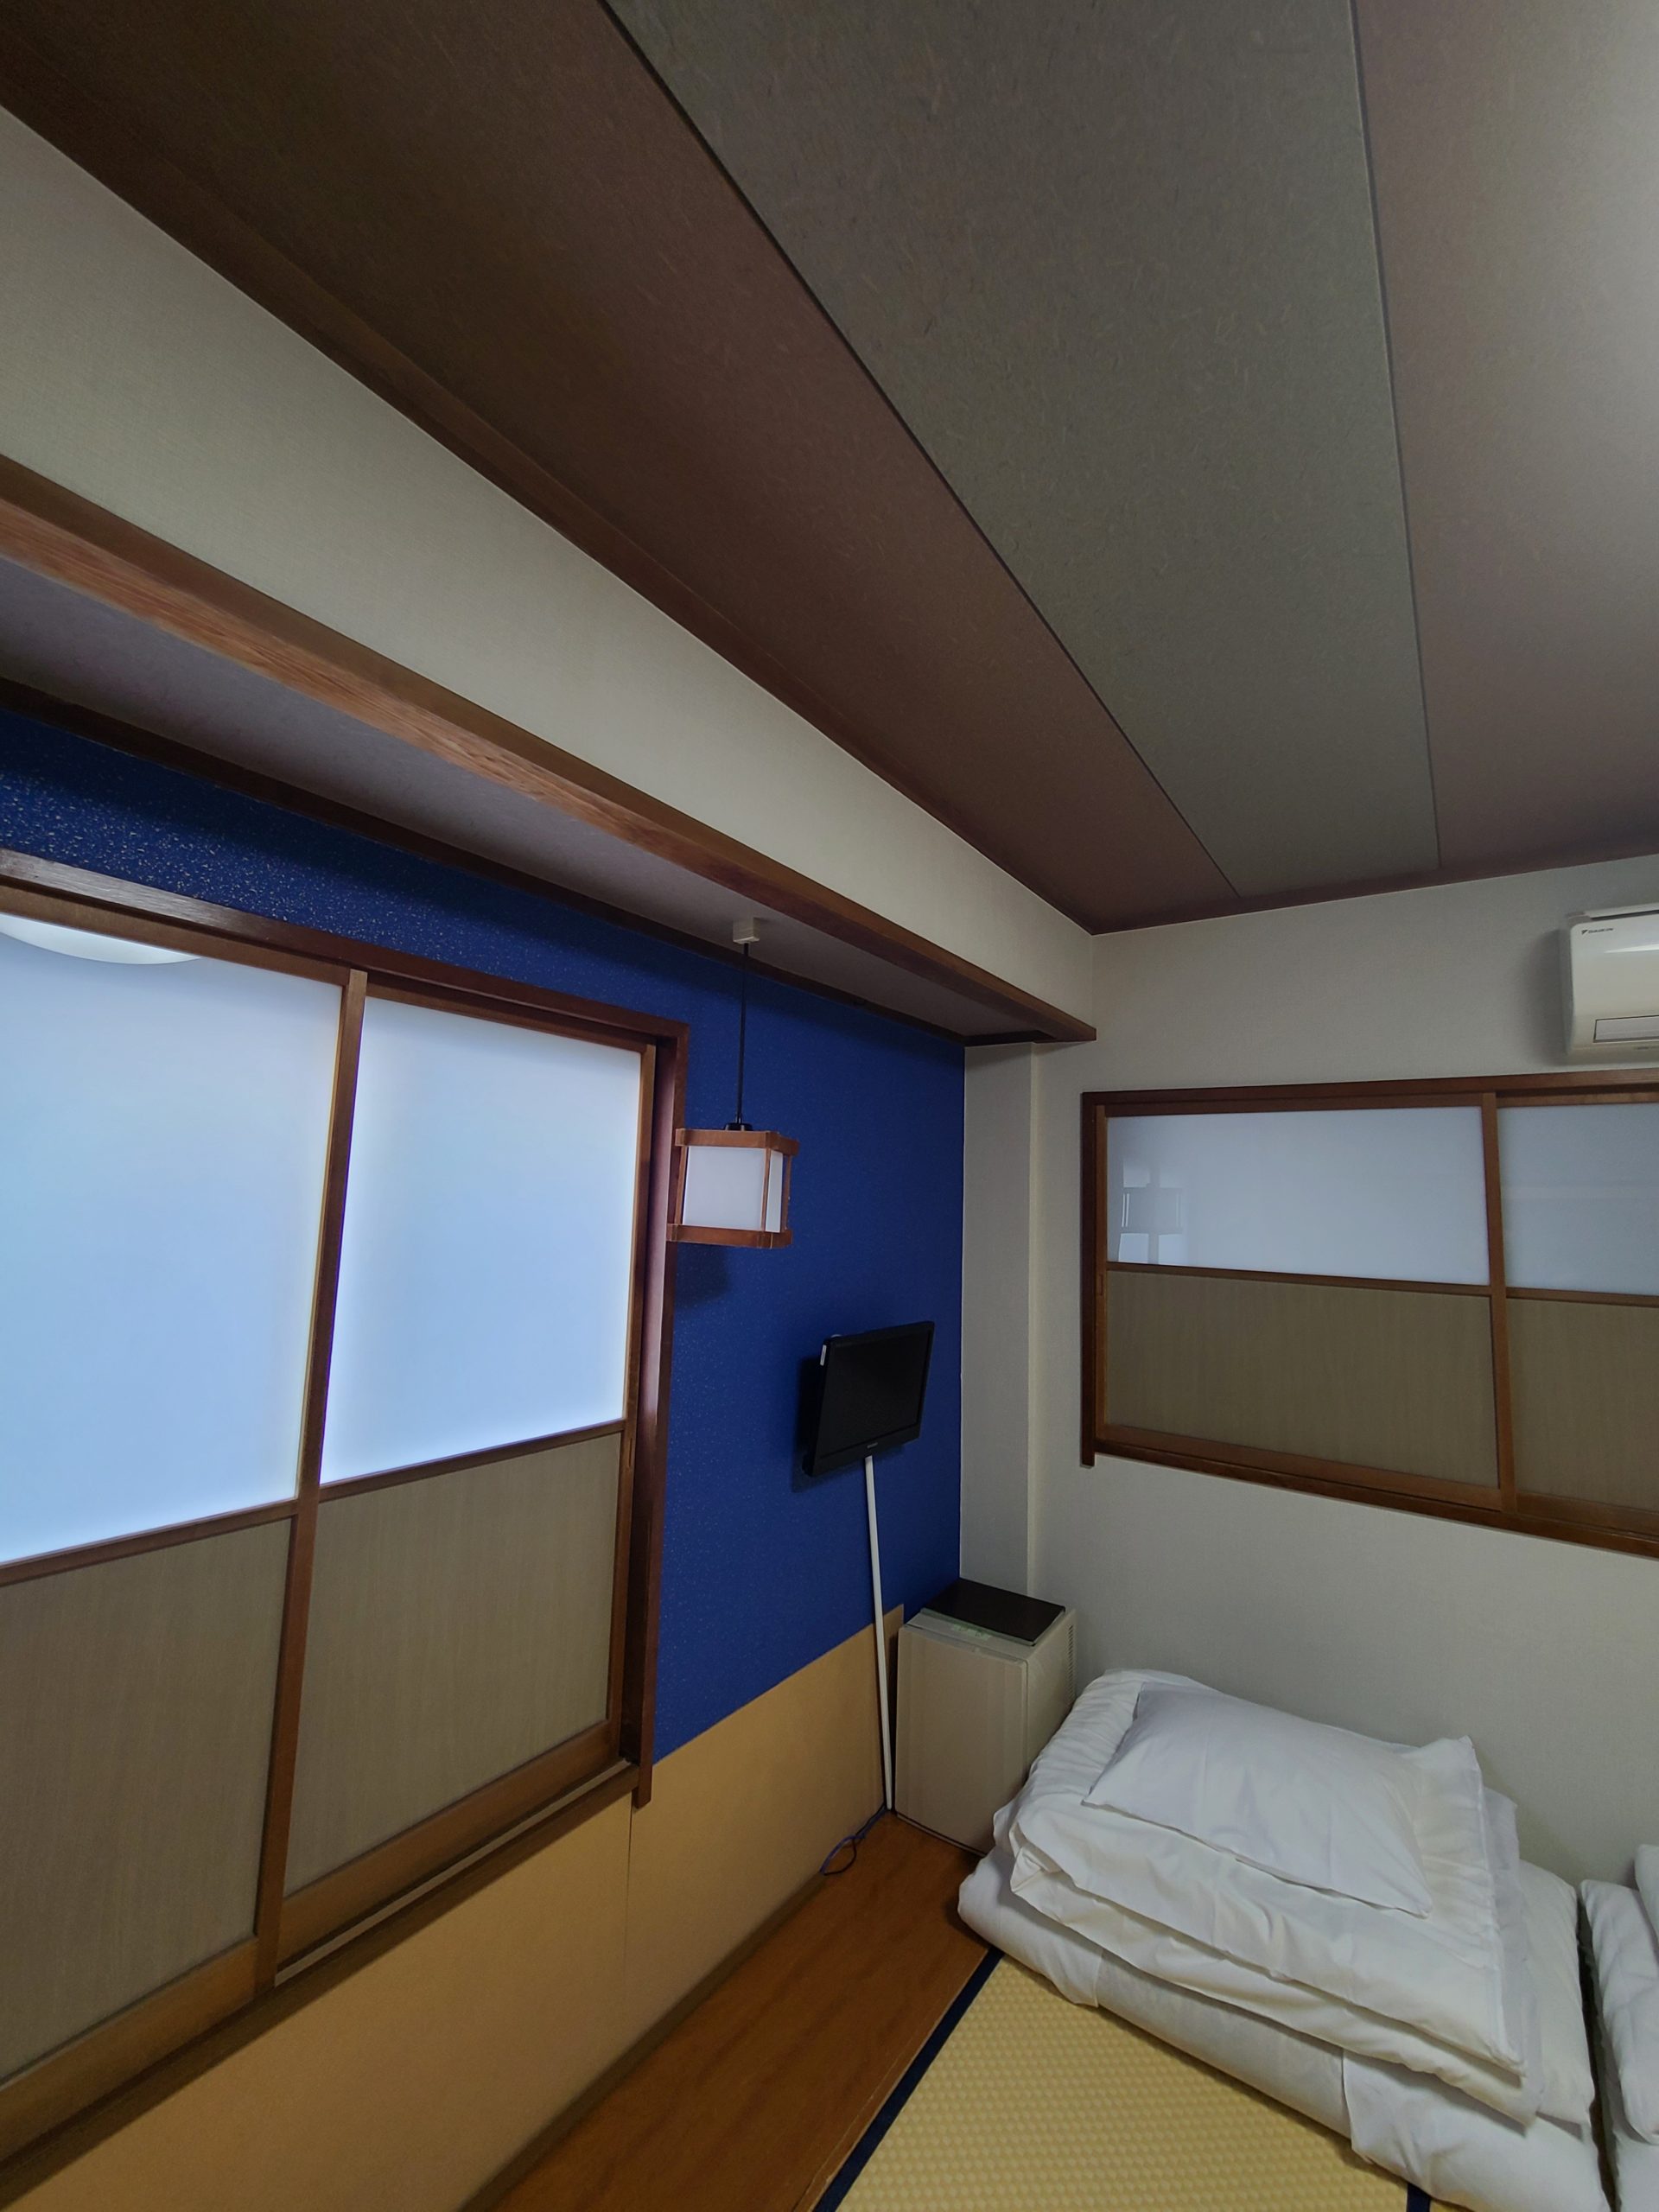 Another example of a Japanese-style room